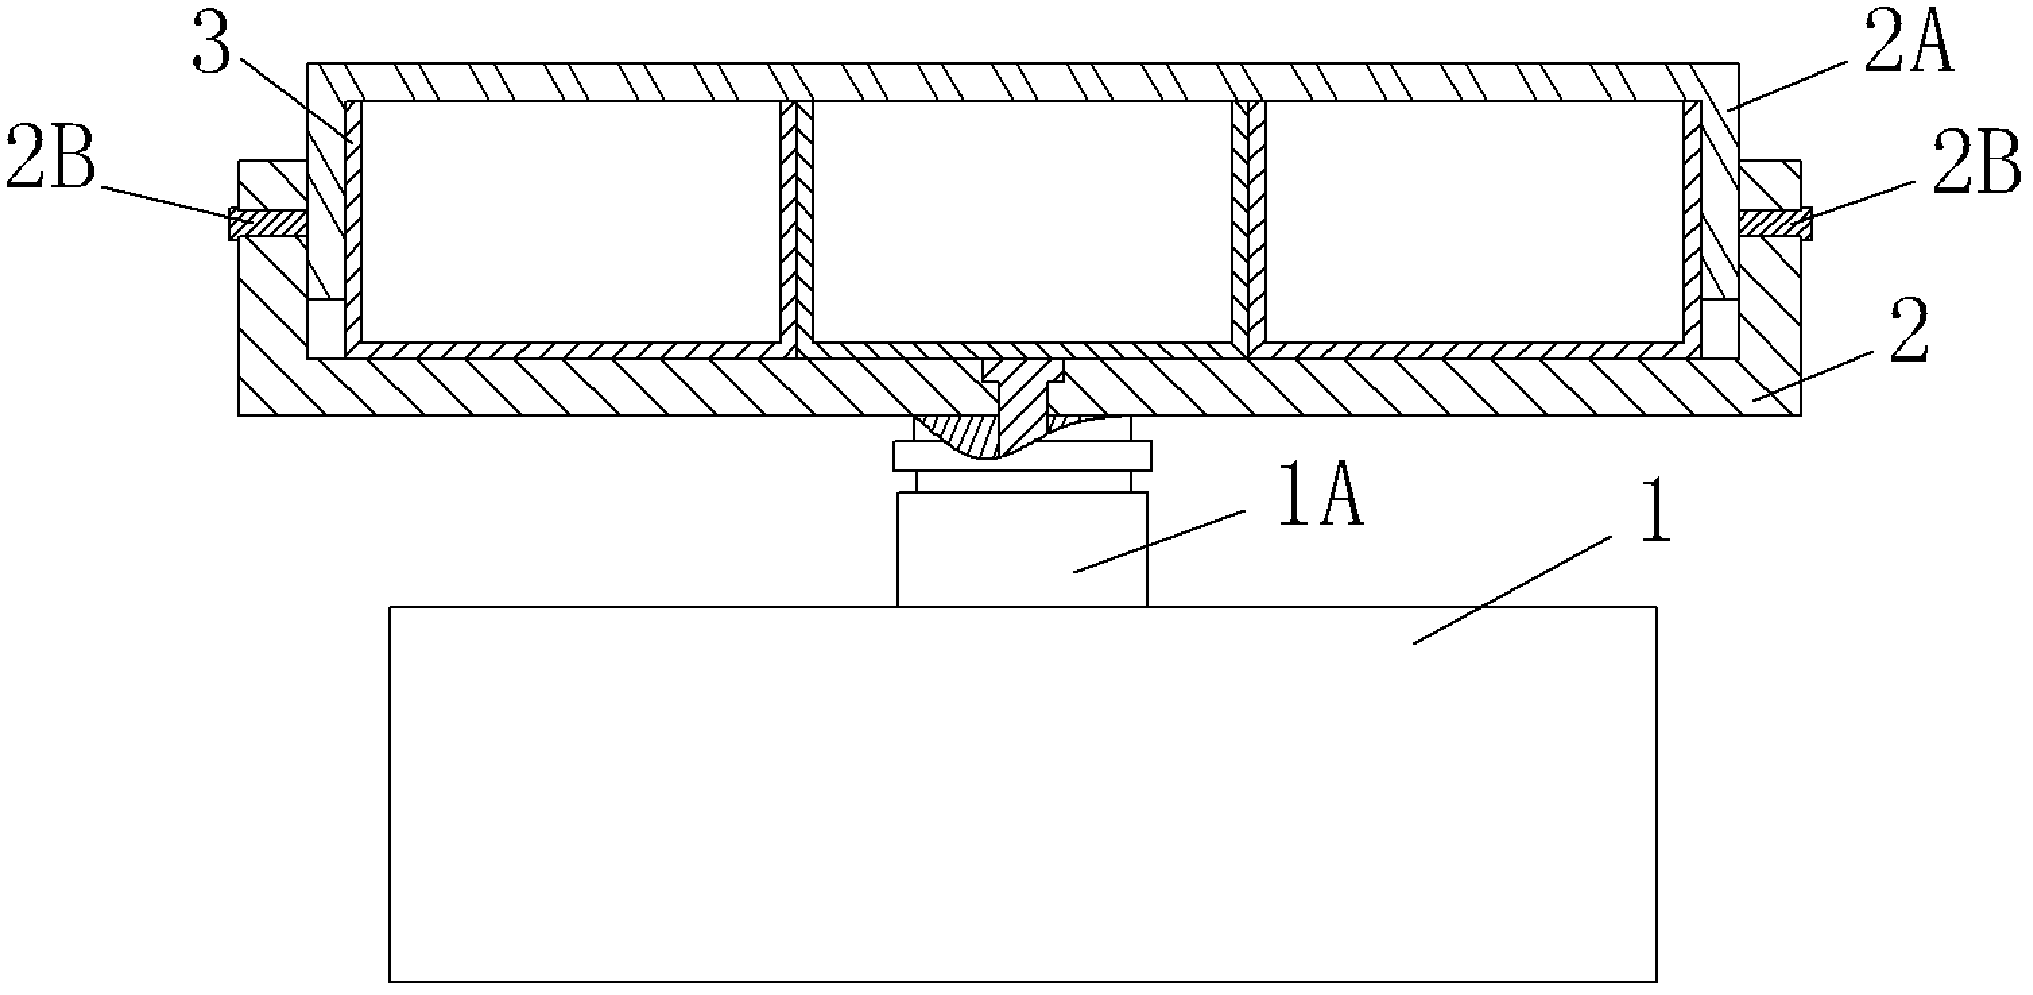 Microvibration loading device for bone formation related cells